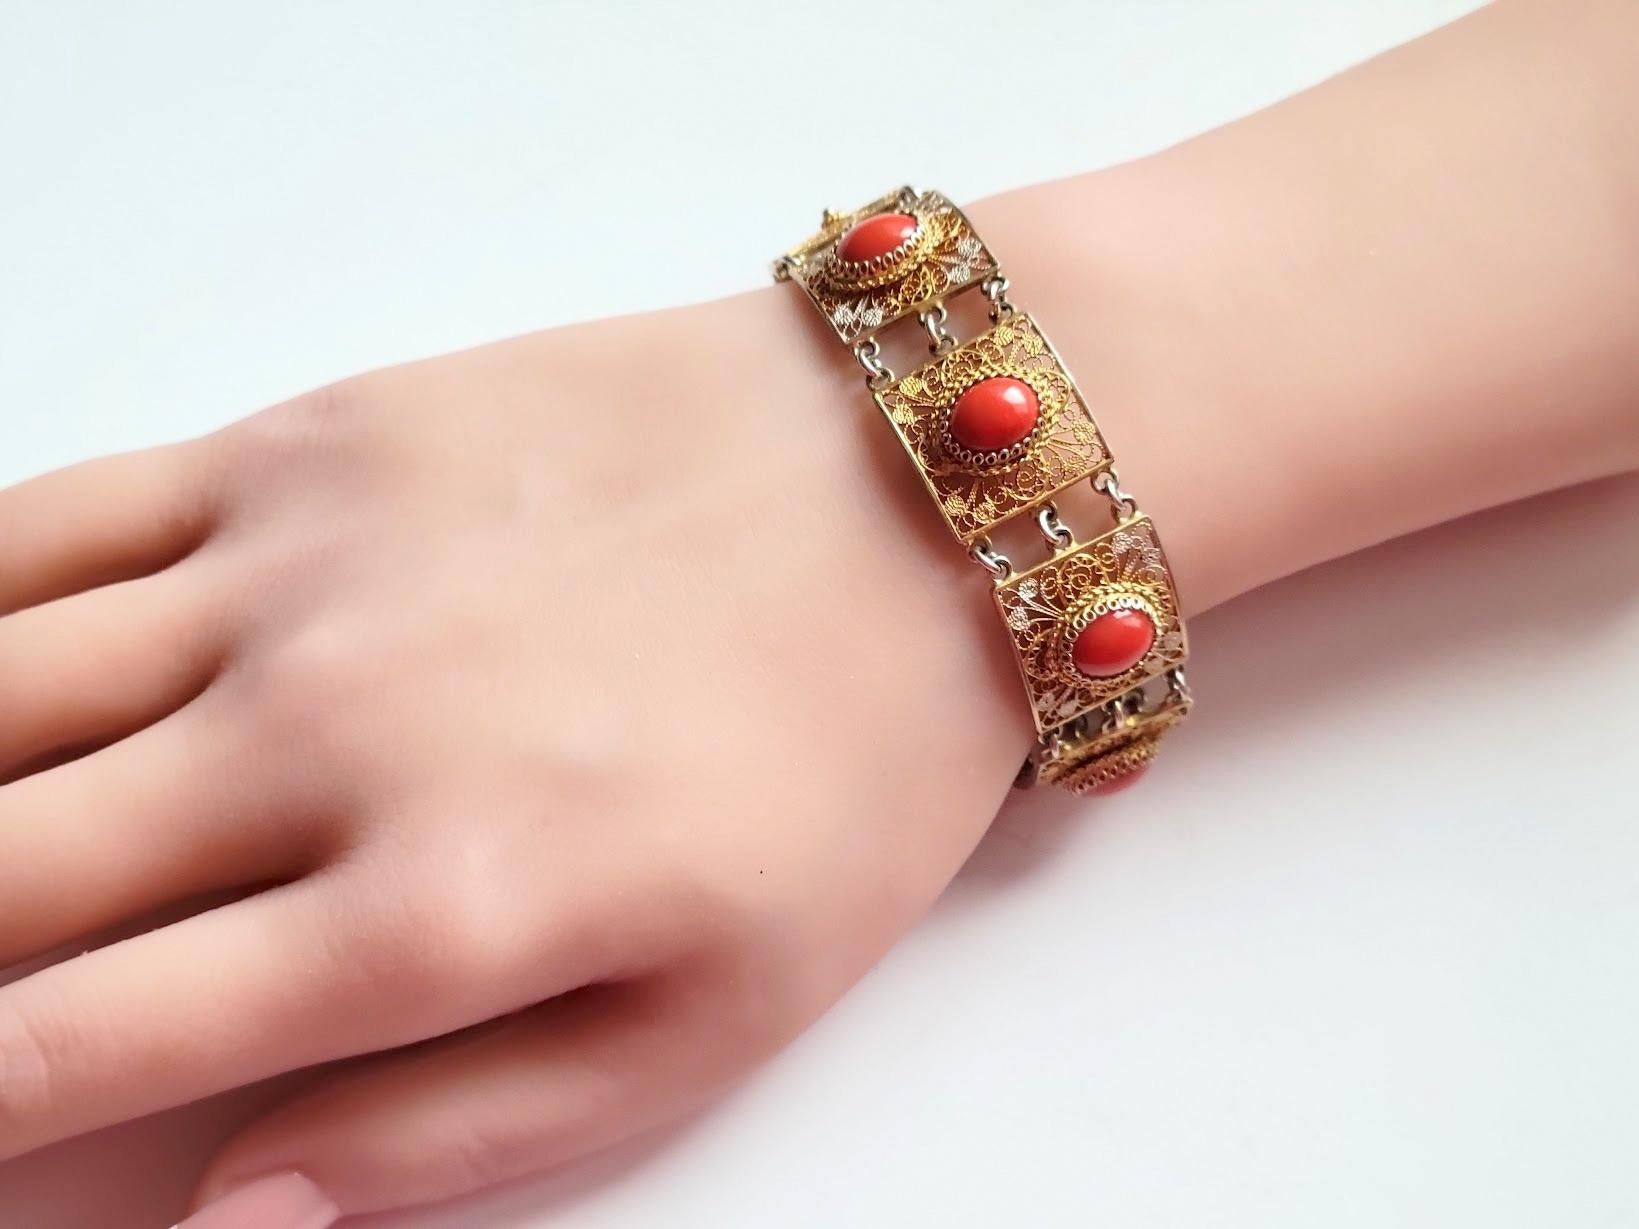 Antique Filigree Italian Coral Bracelet In Excellent Condition For Sale In Chesterland, OH